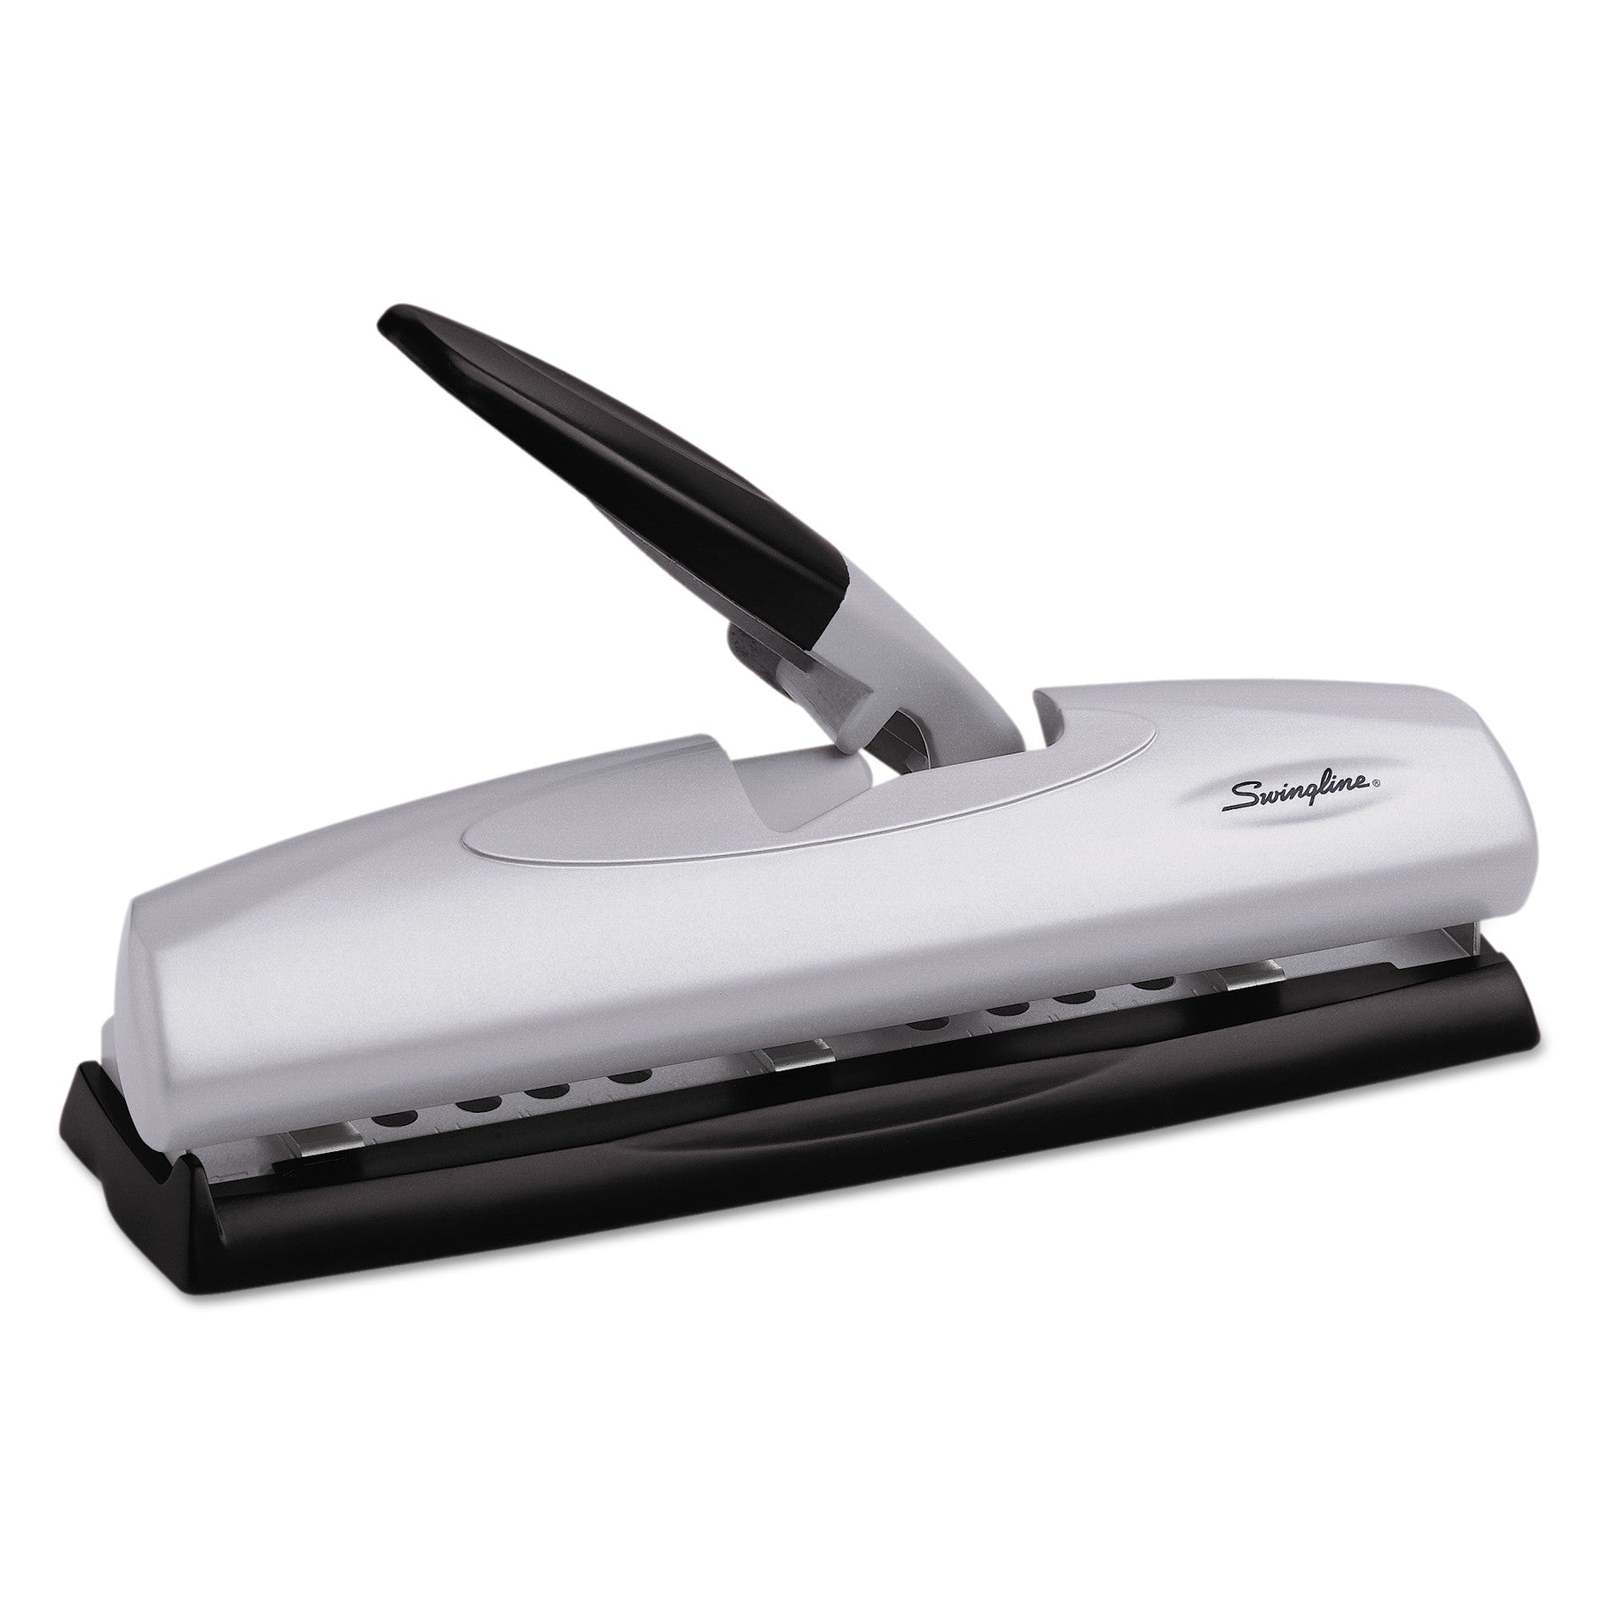 Swingline LightTouch Lever Professional 2- or 3-Hole Punch, 20-Sheet Capacity - $18.95